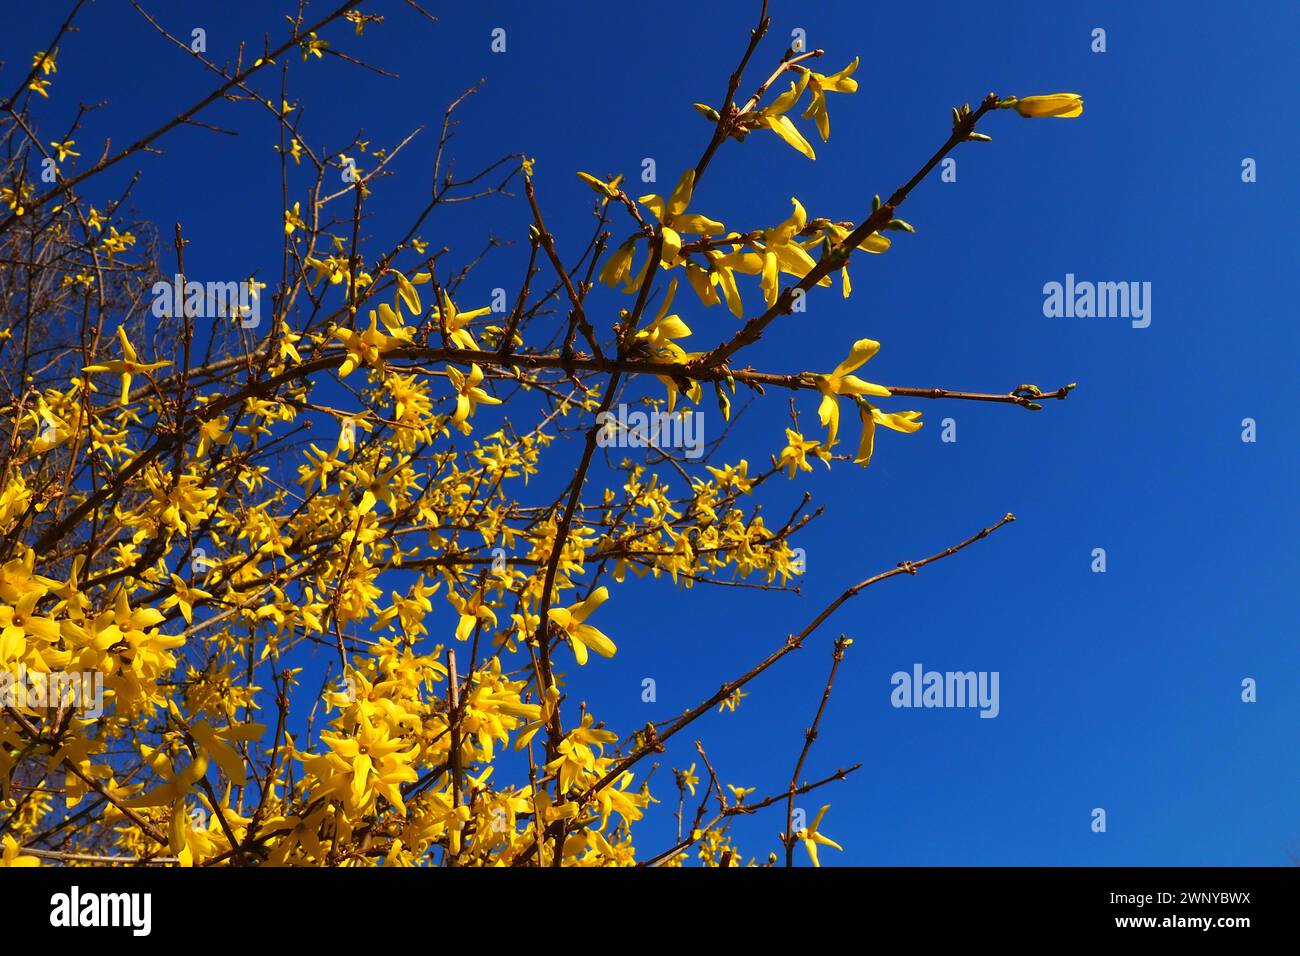 Forsythia is a genus of shrubs and small trees of the Olive family. Numerous yellow flowers on branches and shoots against a blue sky. Lamiaceae Olive Stock Photo